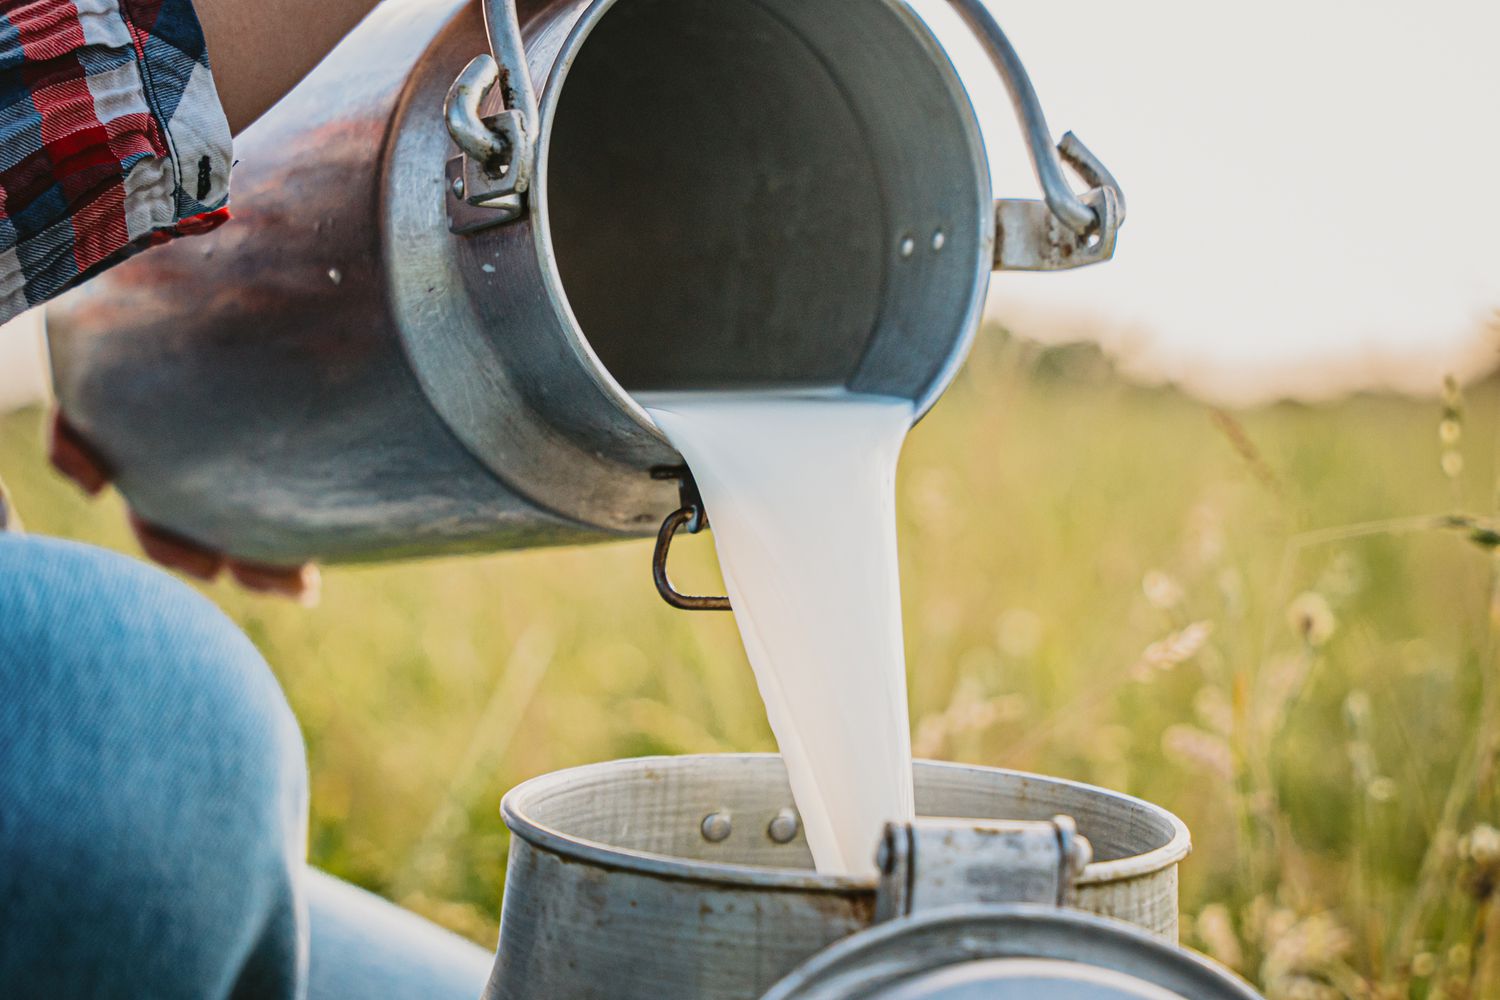 Farmer pouring raw milk into container